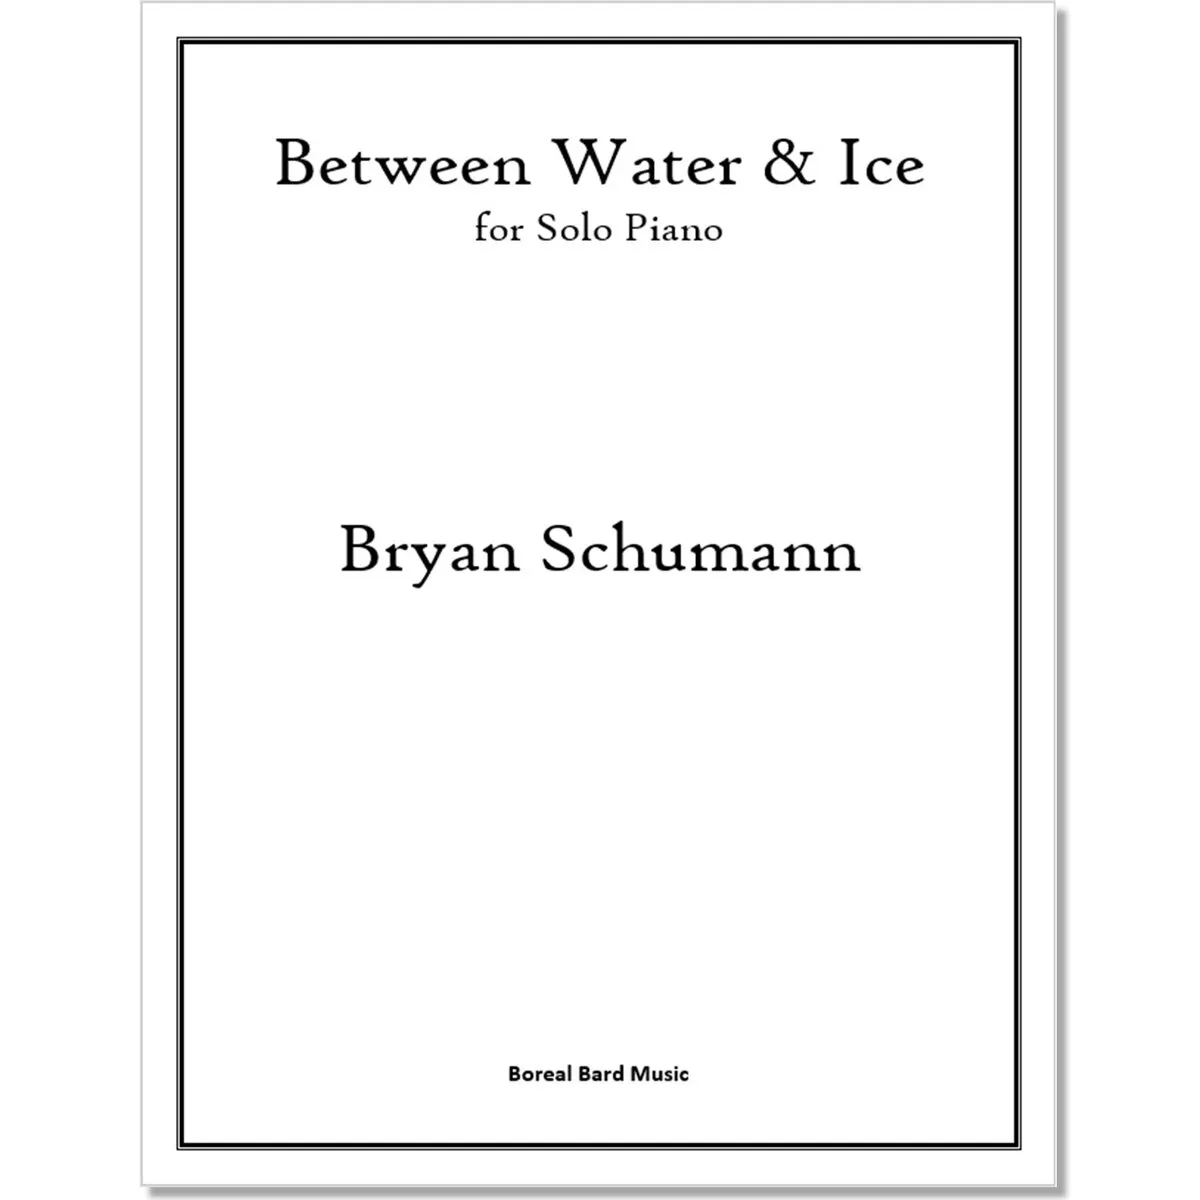 Between Water & Ice for Solo Piano (sheet music)